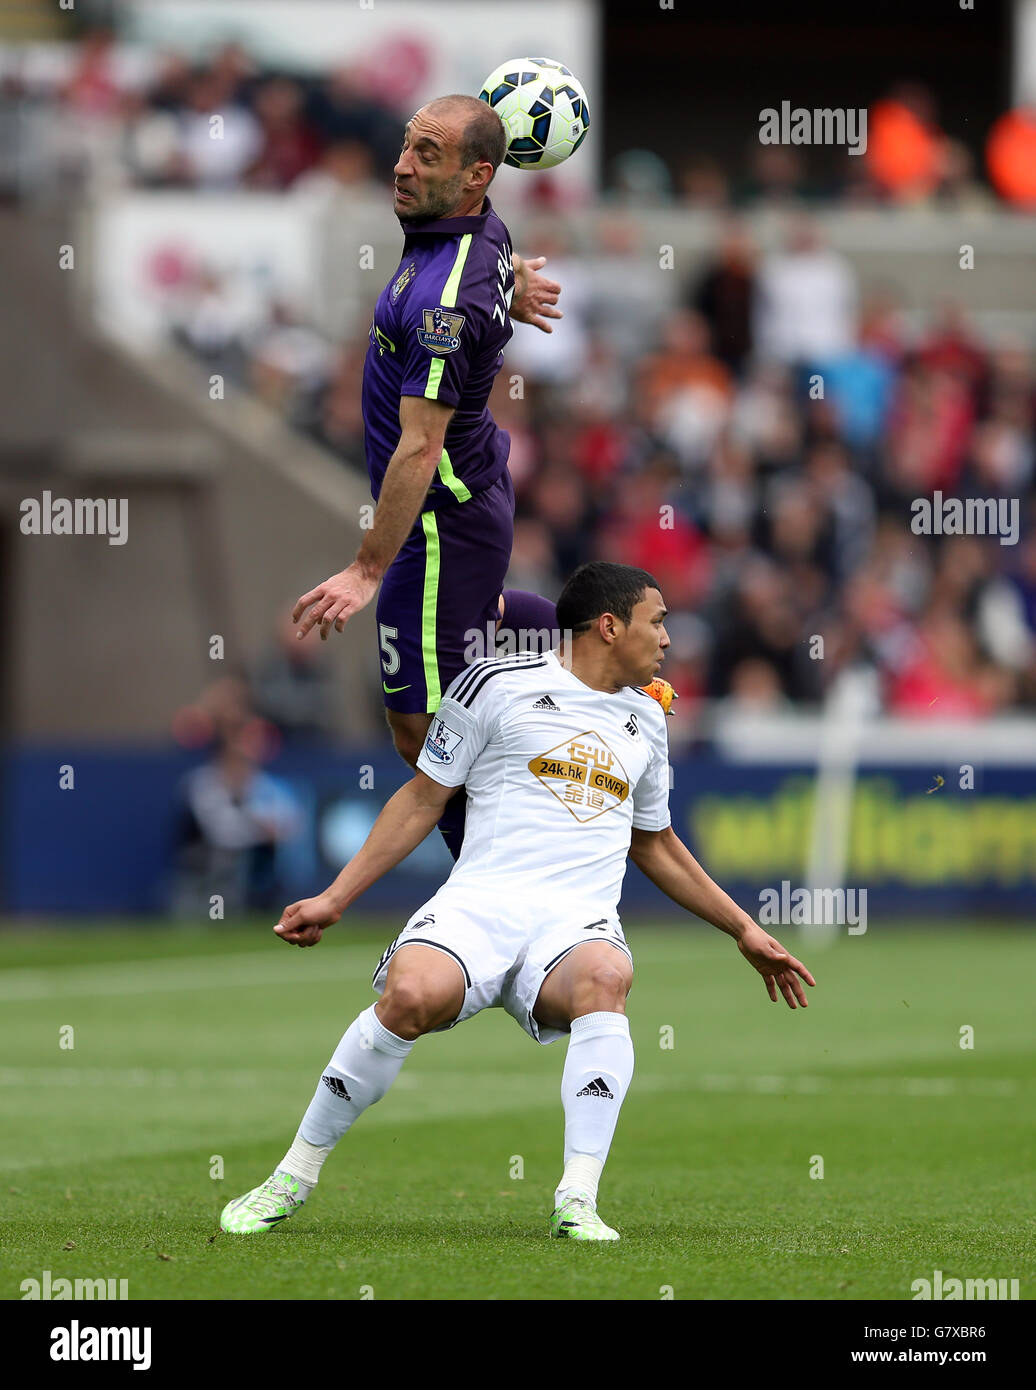 Manchester City's Pablo Zabaleta (top) and Swansea City's Jefferson Montero battle for the ball during the Barclays Premier League match at the Liberty Stadium, Swansea. Stock Photo